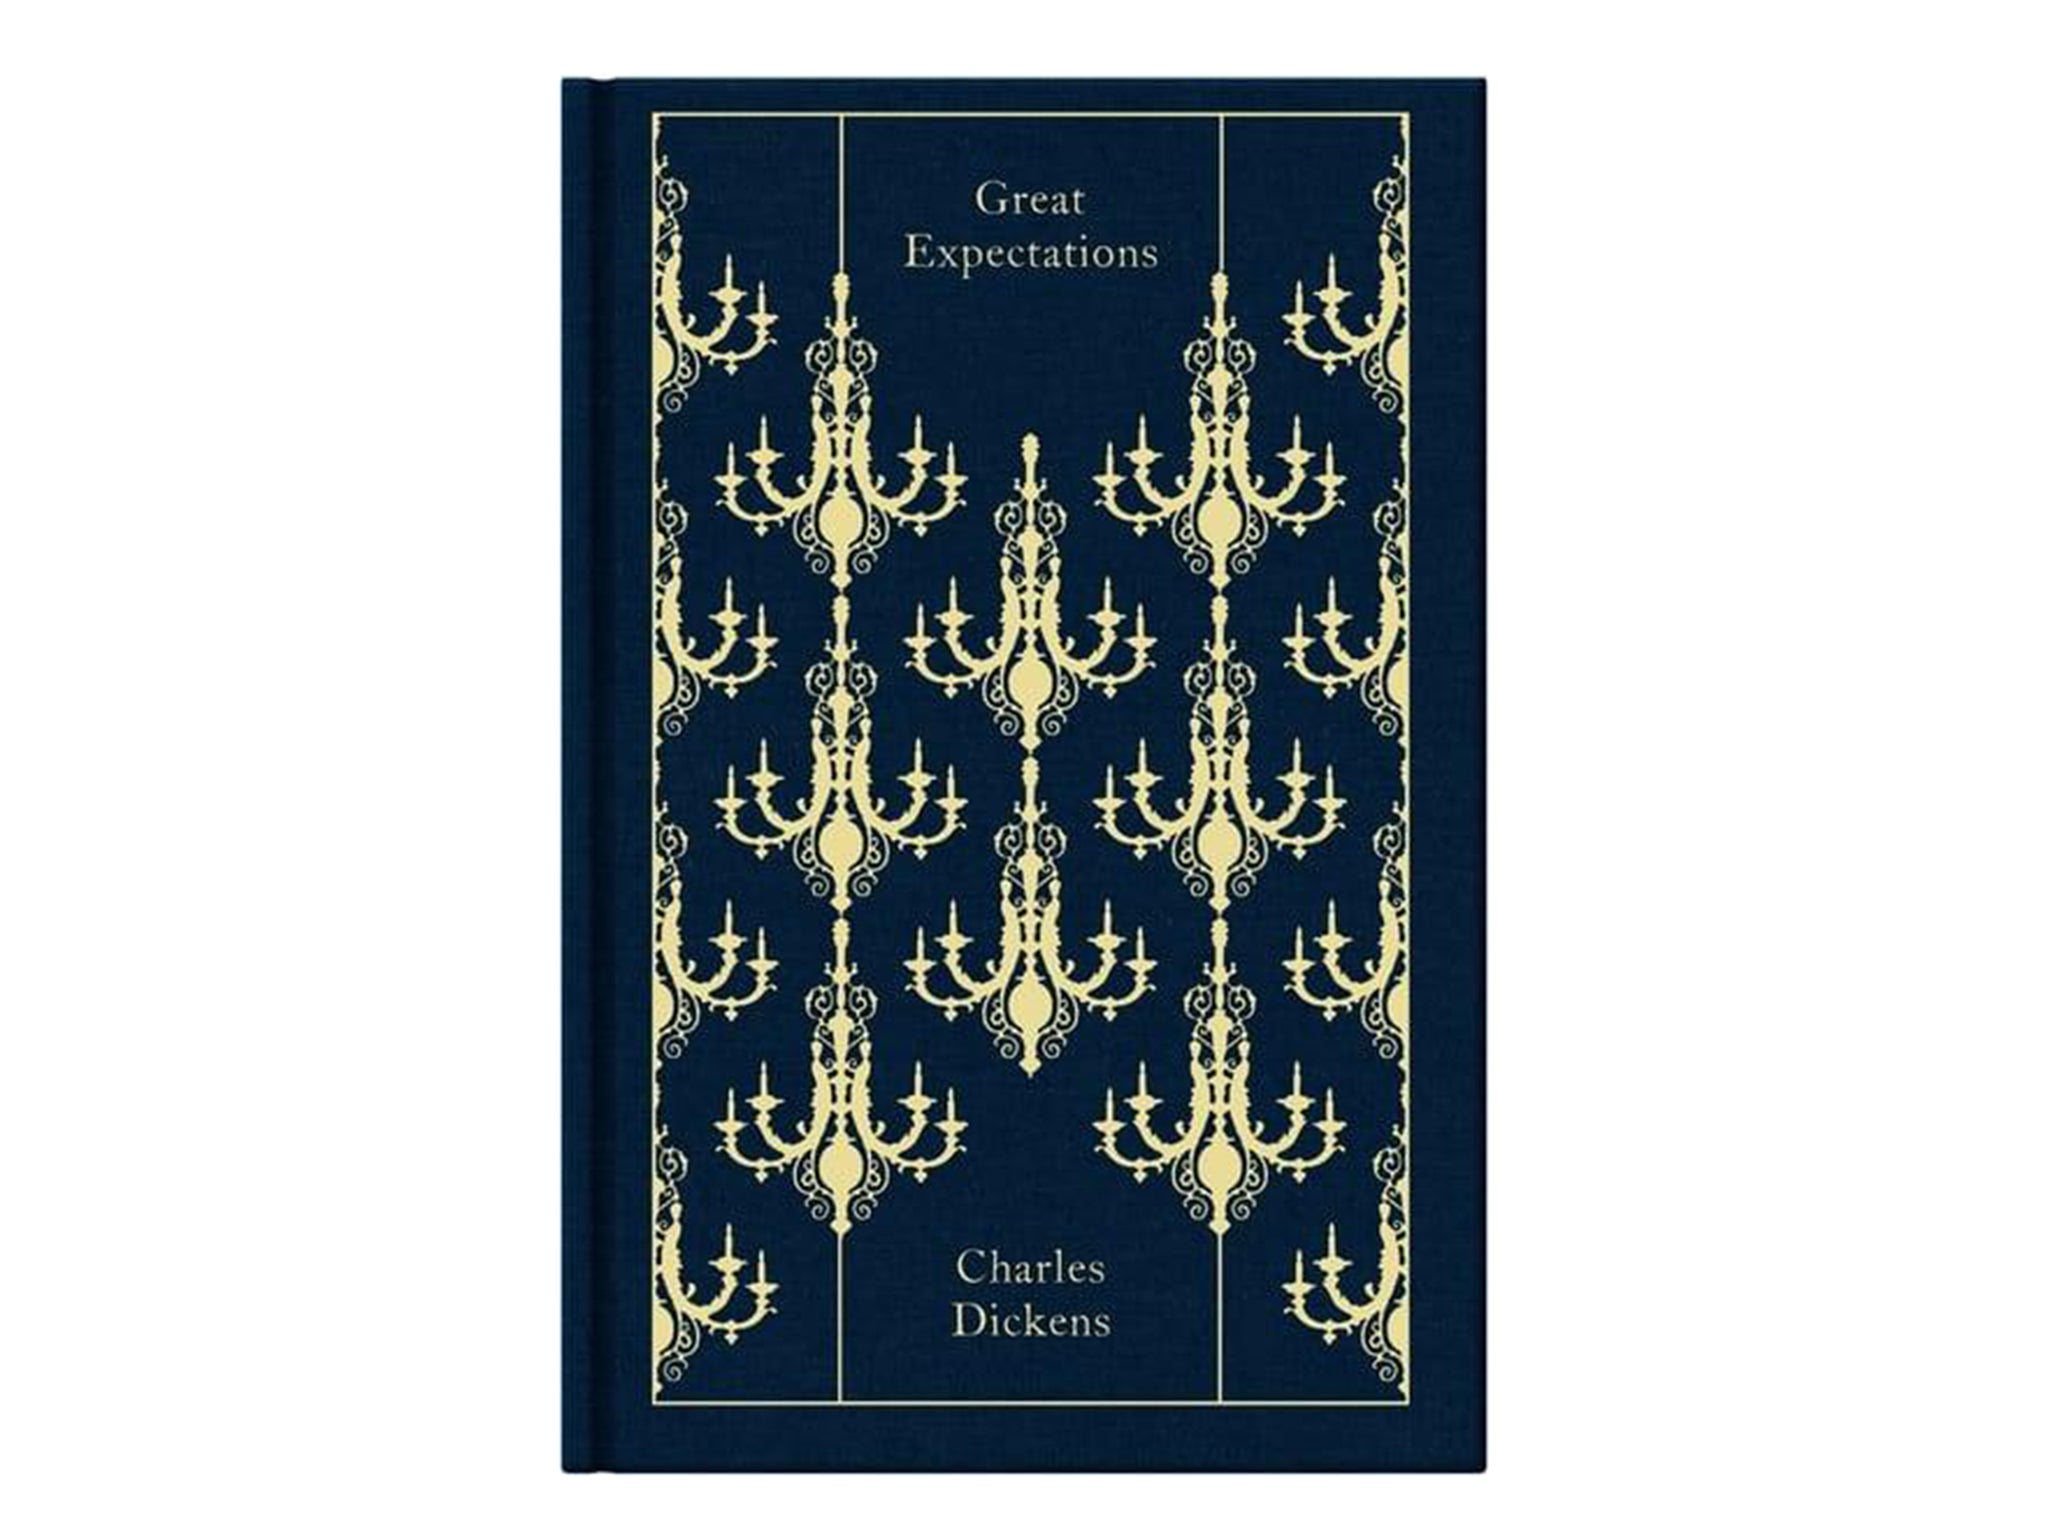 great-expectations-charles-dickens-indybest.jpg